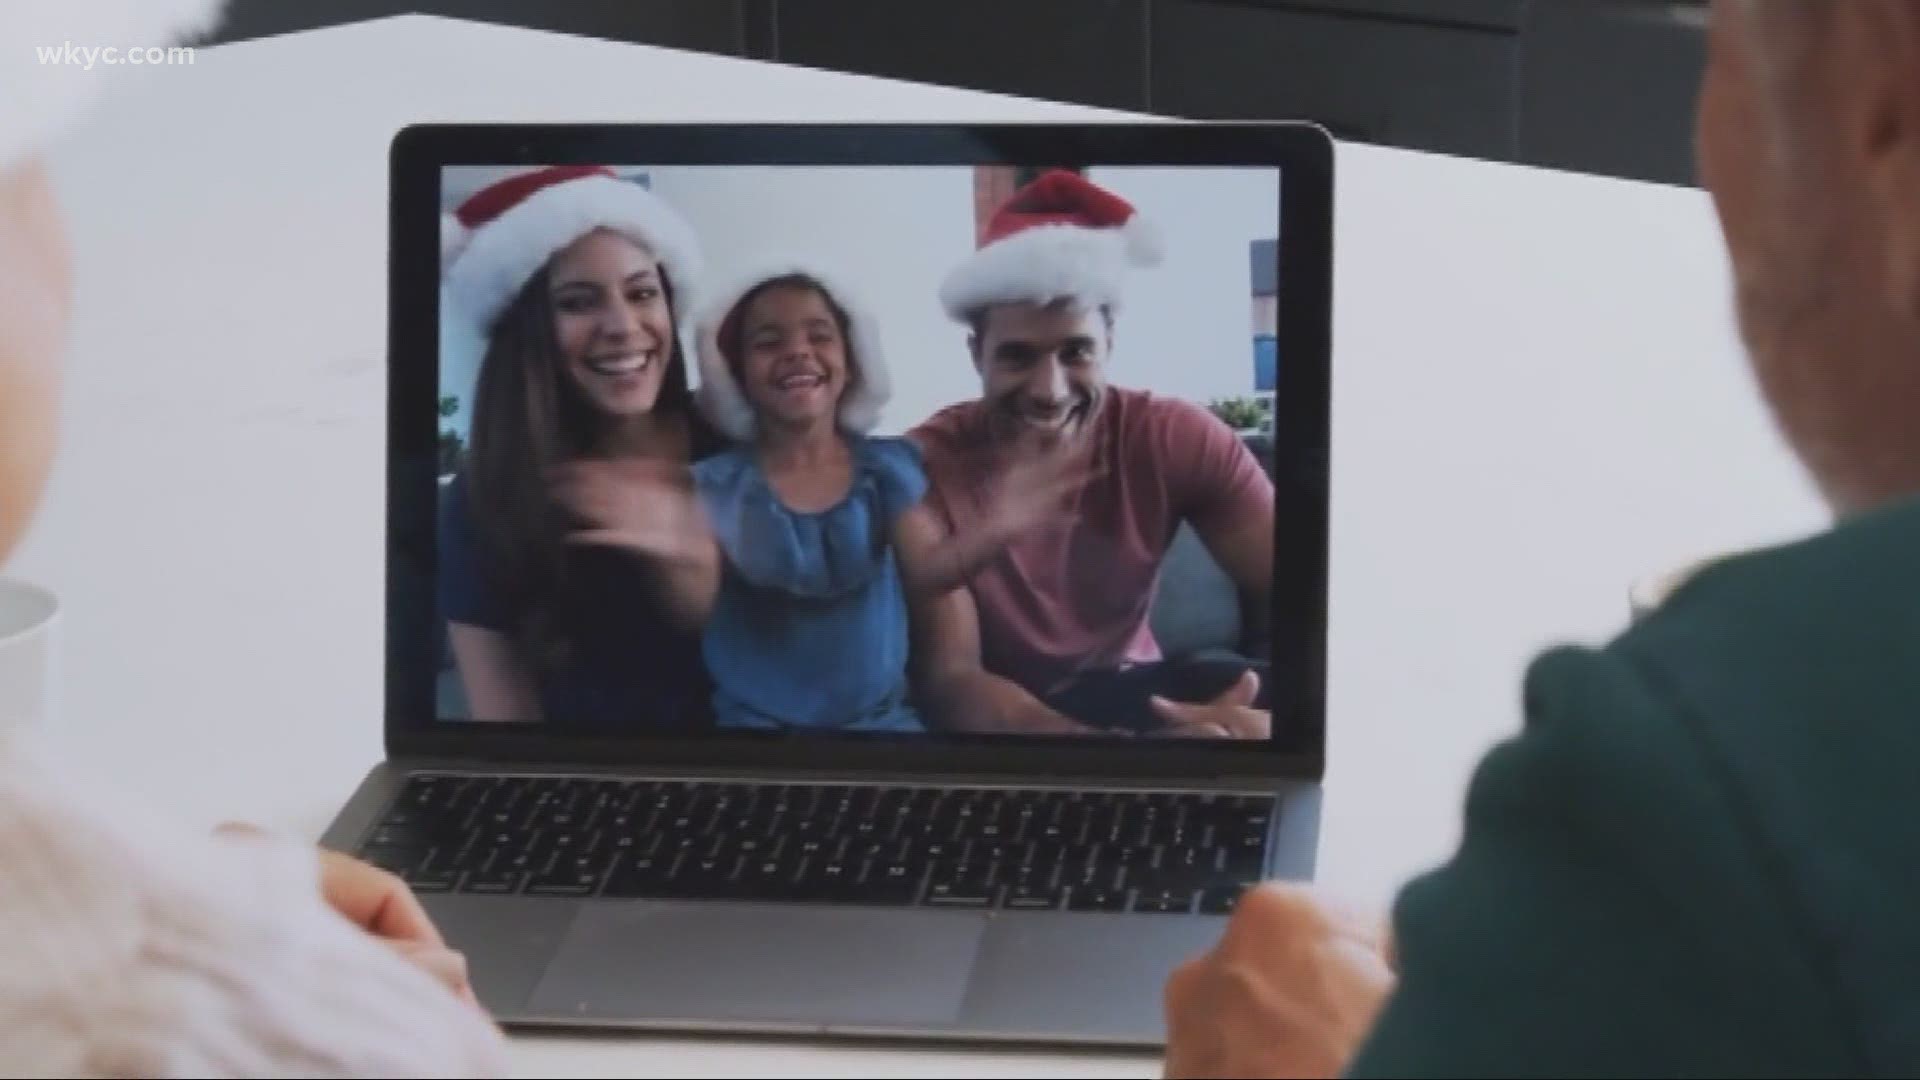 The holidays are upon us. Send us your video messages to family and friends and we just might air it on TV.